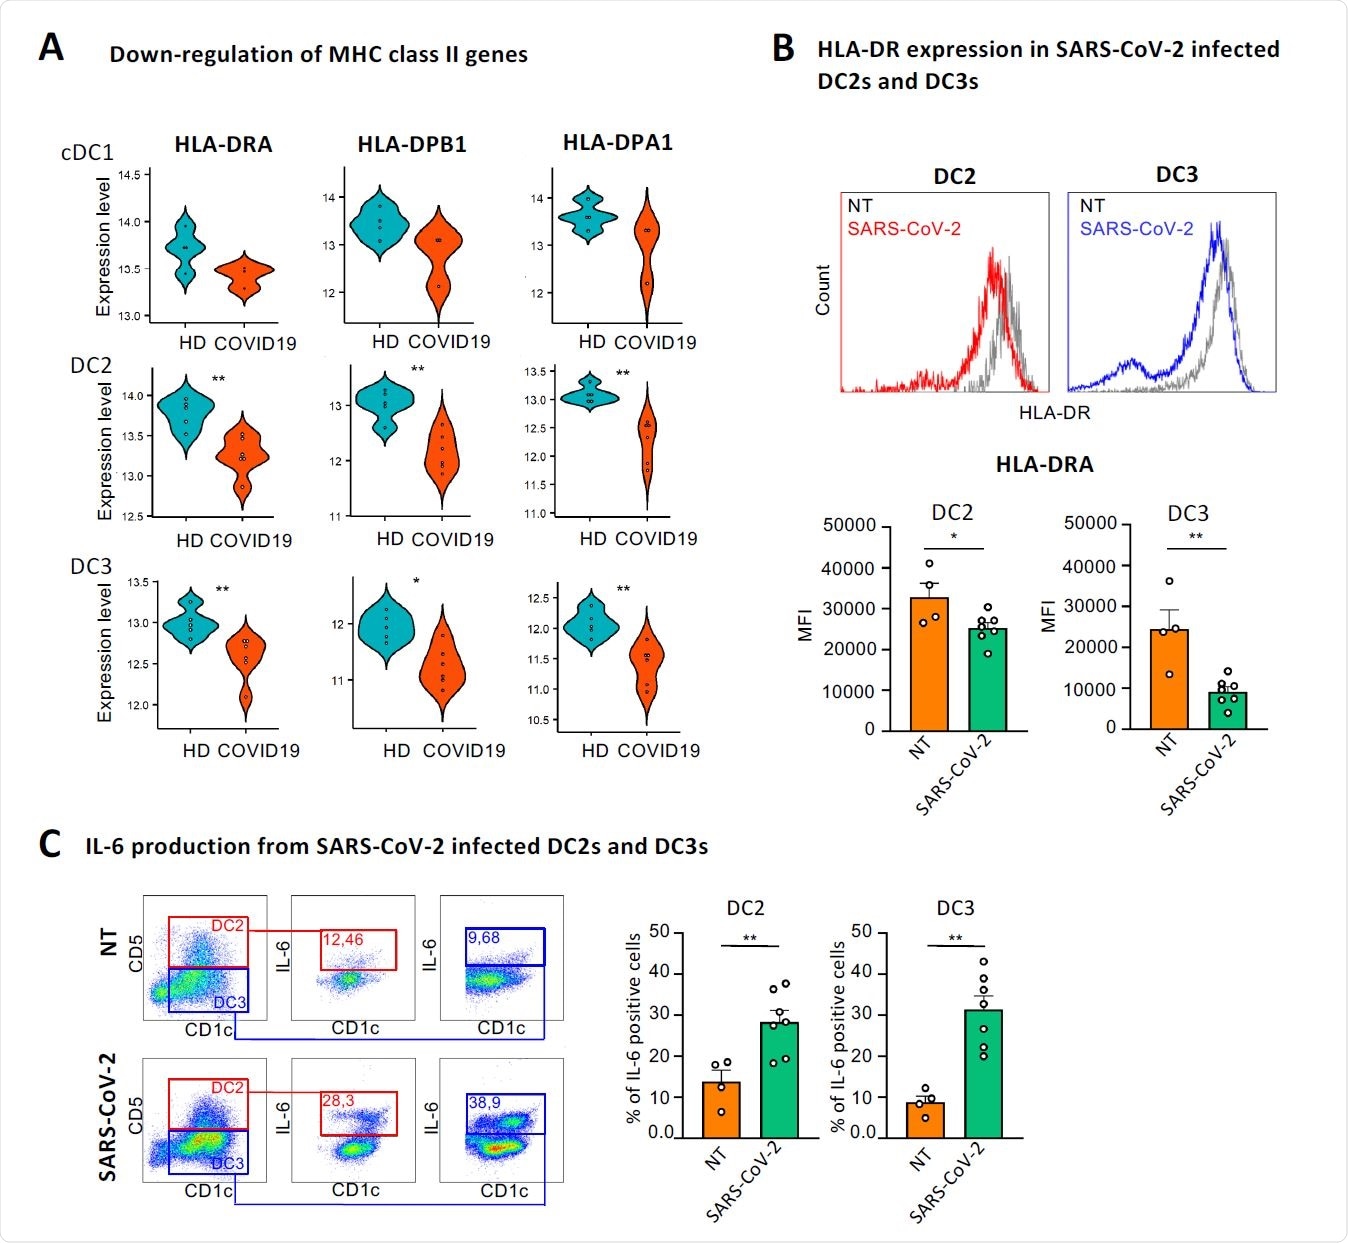 SARS-CoV-2 directly induces down-regulation of HLA-DR and production of IL- 6 in DC2s and DC3s. (A) Violin plots showing the expression levels of HLA-DRA, HLA-DPB1 and HLA-DPA1 in cDC1s, DC2s and DC3s of healthy controls and COVID-19 patients from dataset 1. Healthy samples are colored in blue and COVID-19 patients in red. *p < 0.05, **p < 0.01, Wilcoxon signed-rank test. (B, upper panel) Representative histograms showing HLA-DR expression in cDC2s from HDs infected or not (NT) with 0.4 MOI of SARS-CoV-2 for 18 hours. DC2s and DC3s were identified as CD5+ CD1c+ and CD5- CD1c+ respectively over the CD11+LIN- (CD88, CD89, CD3 and CD19) and FceRIa+. (B lower panel) Quantitative analysis of mean fluorescent intensity (MFI) of HLA-DR in DC2s and DC3s. Statistical significance was determined with unpaired student’s t-test. *p < 0.005,